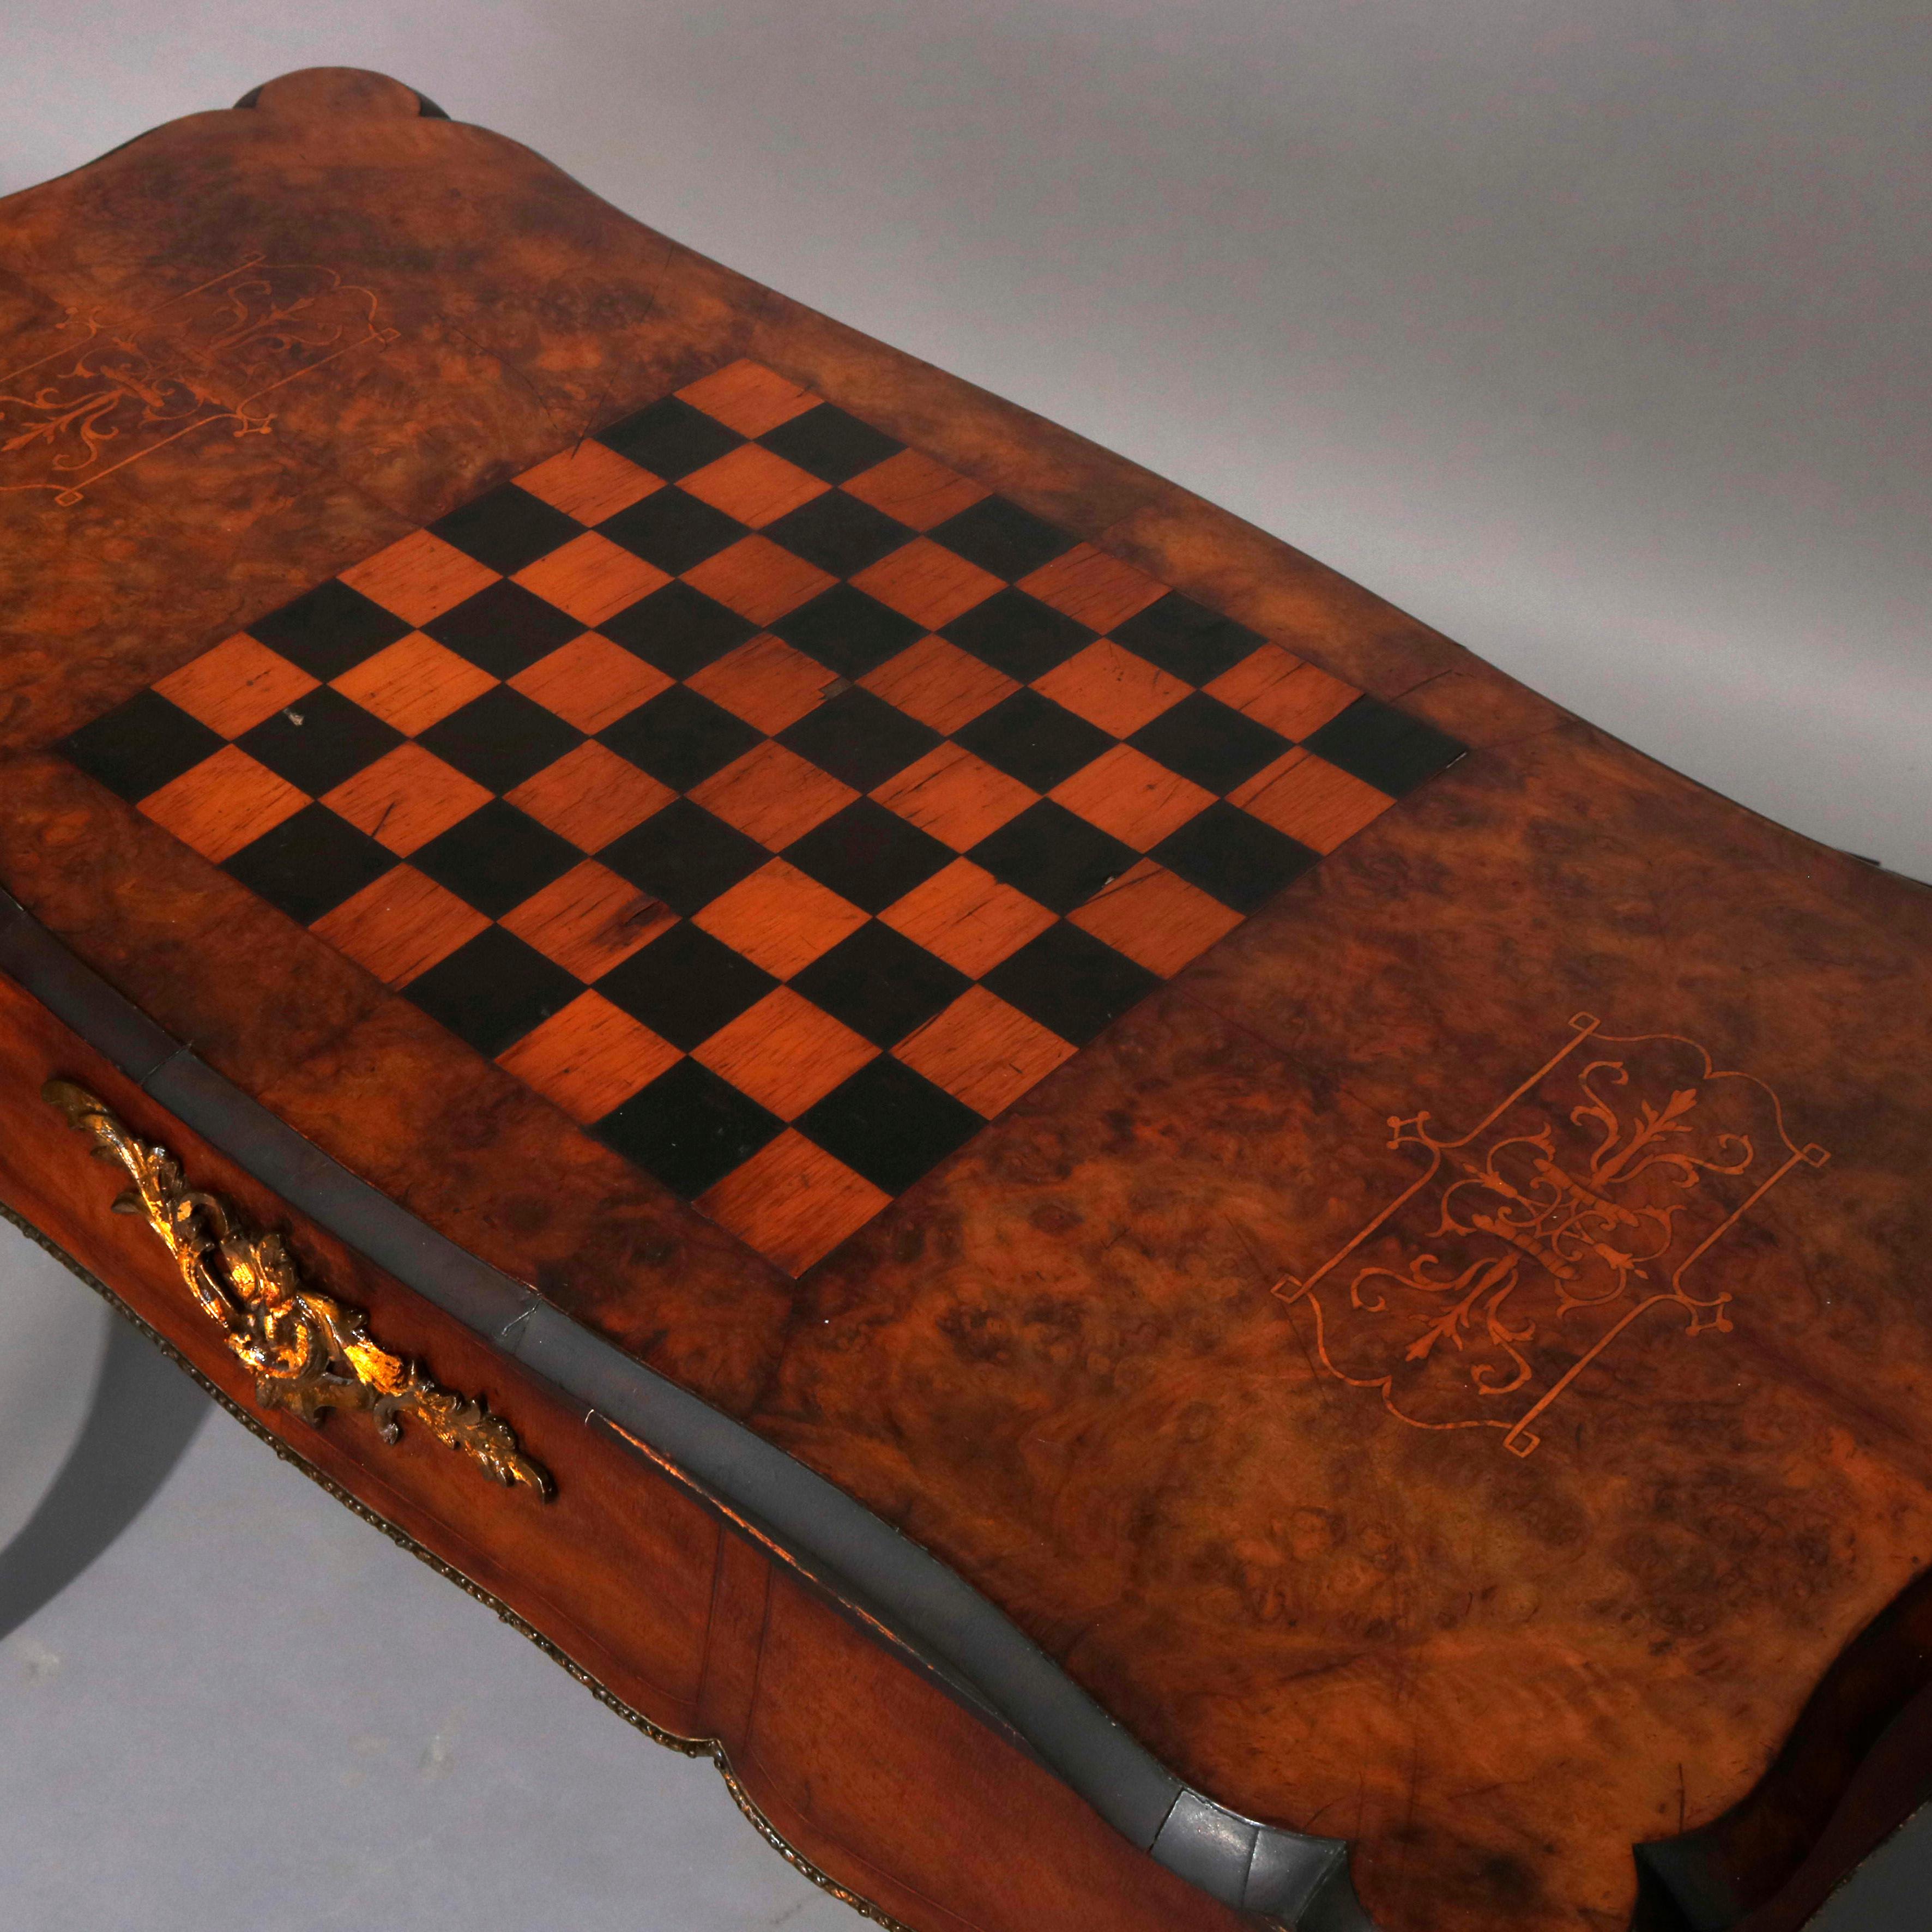 Inlay Antique French Louis XIV Style Walnut, Burl & Ormolu Inlaid Game Table c. 1880